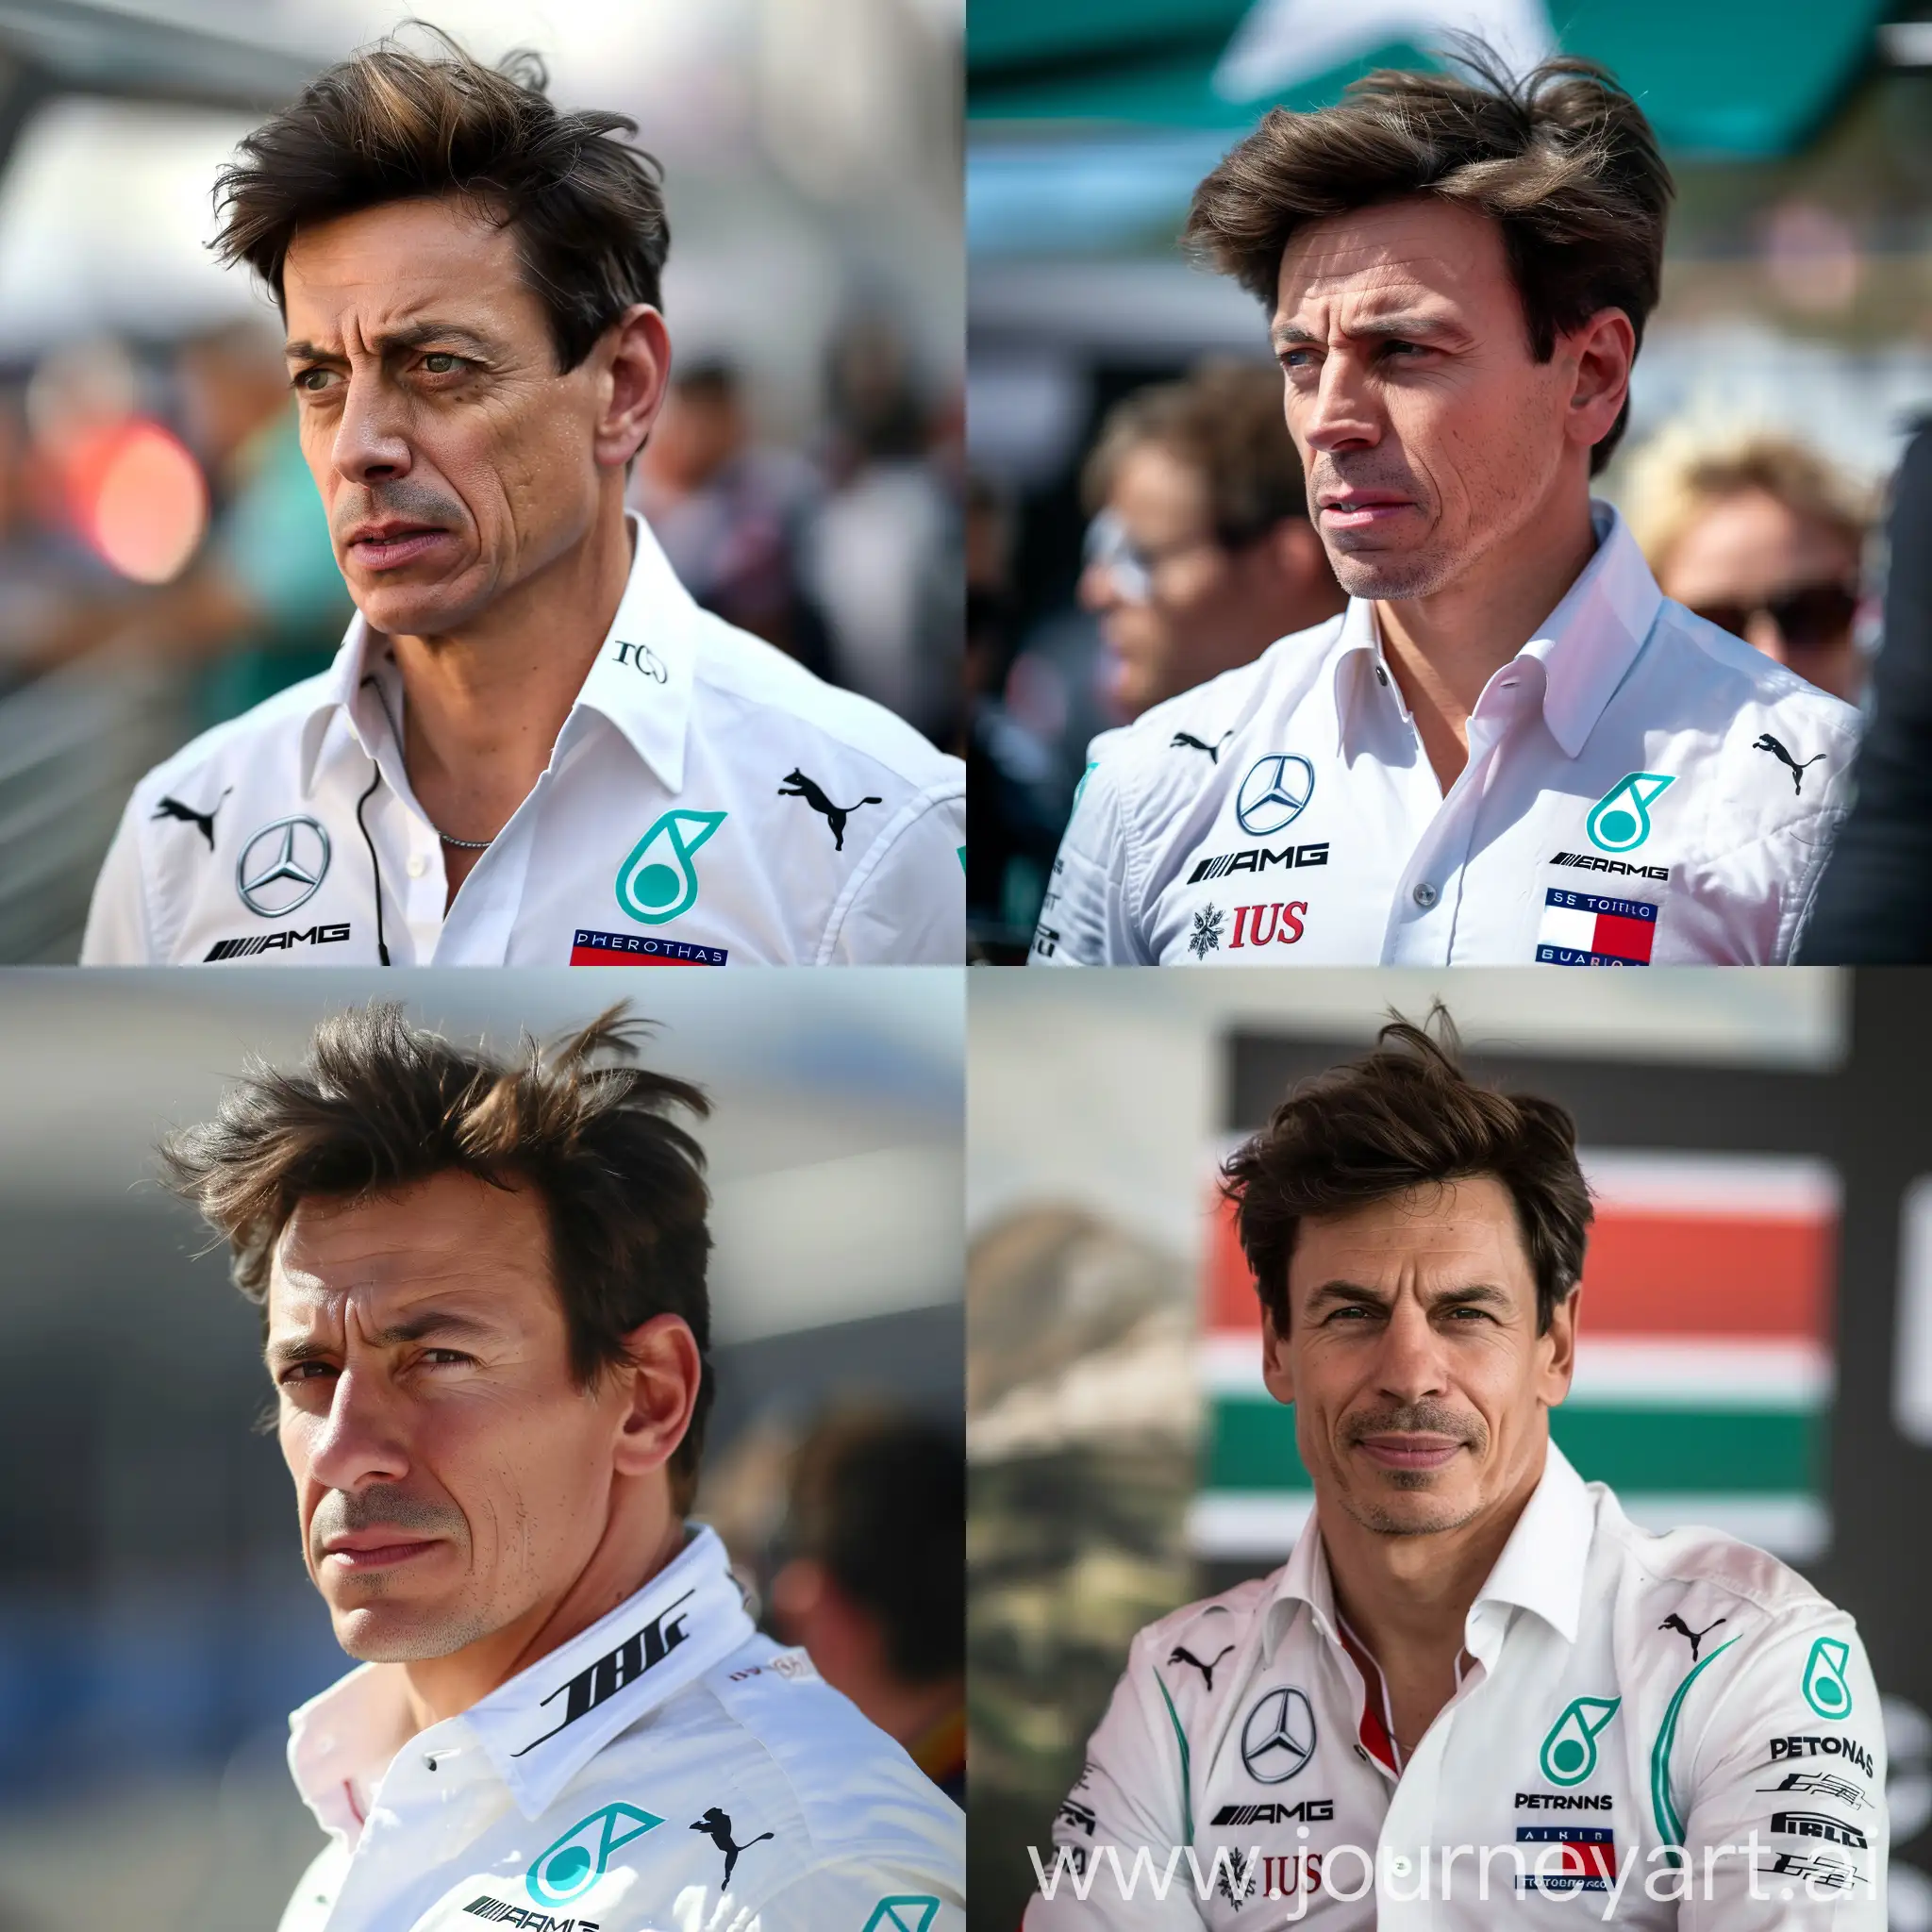 Mercedes F1 CEO Toto Wolff as woman